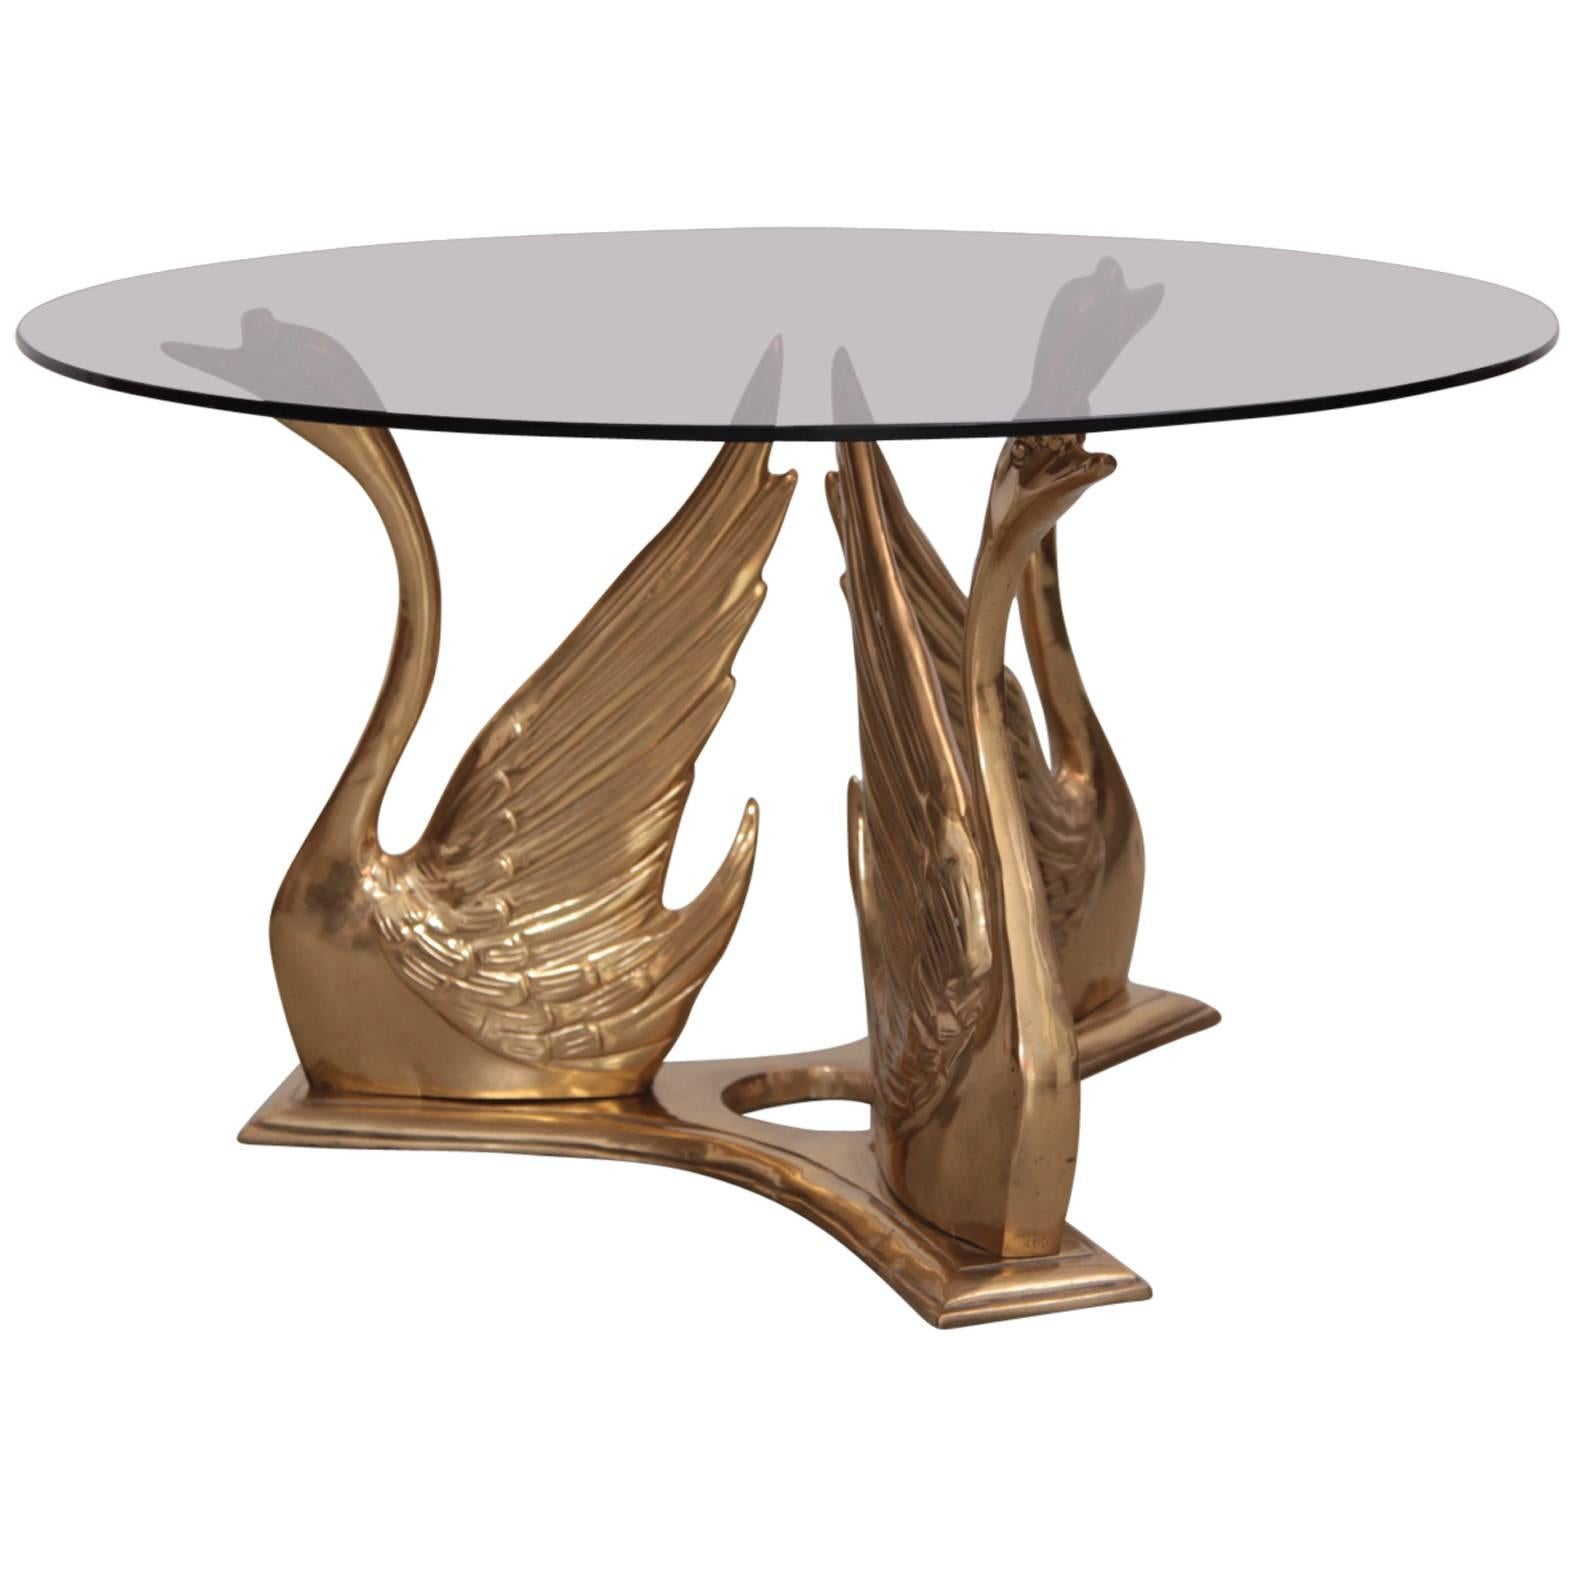 Massive Brass Coffee or Side Table with Swans